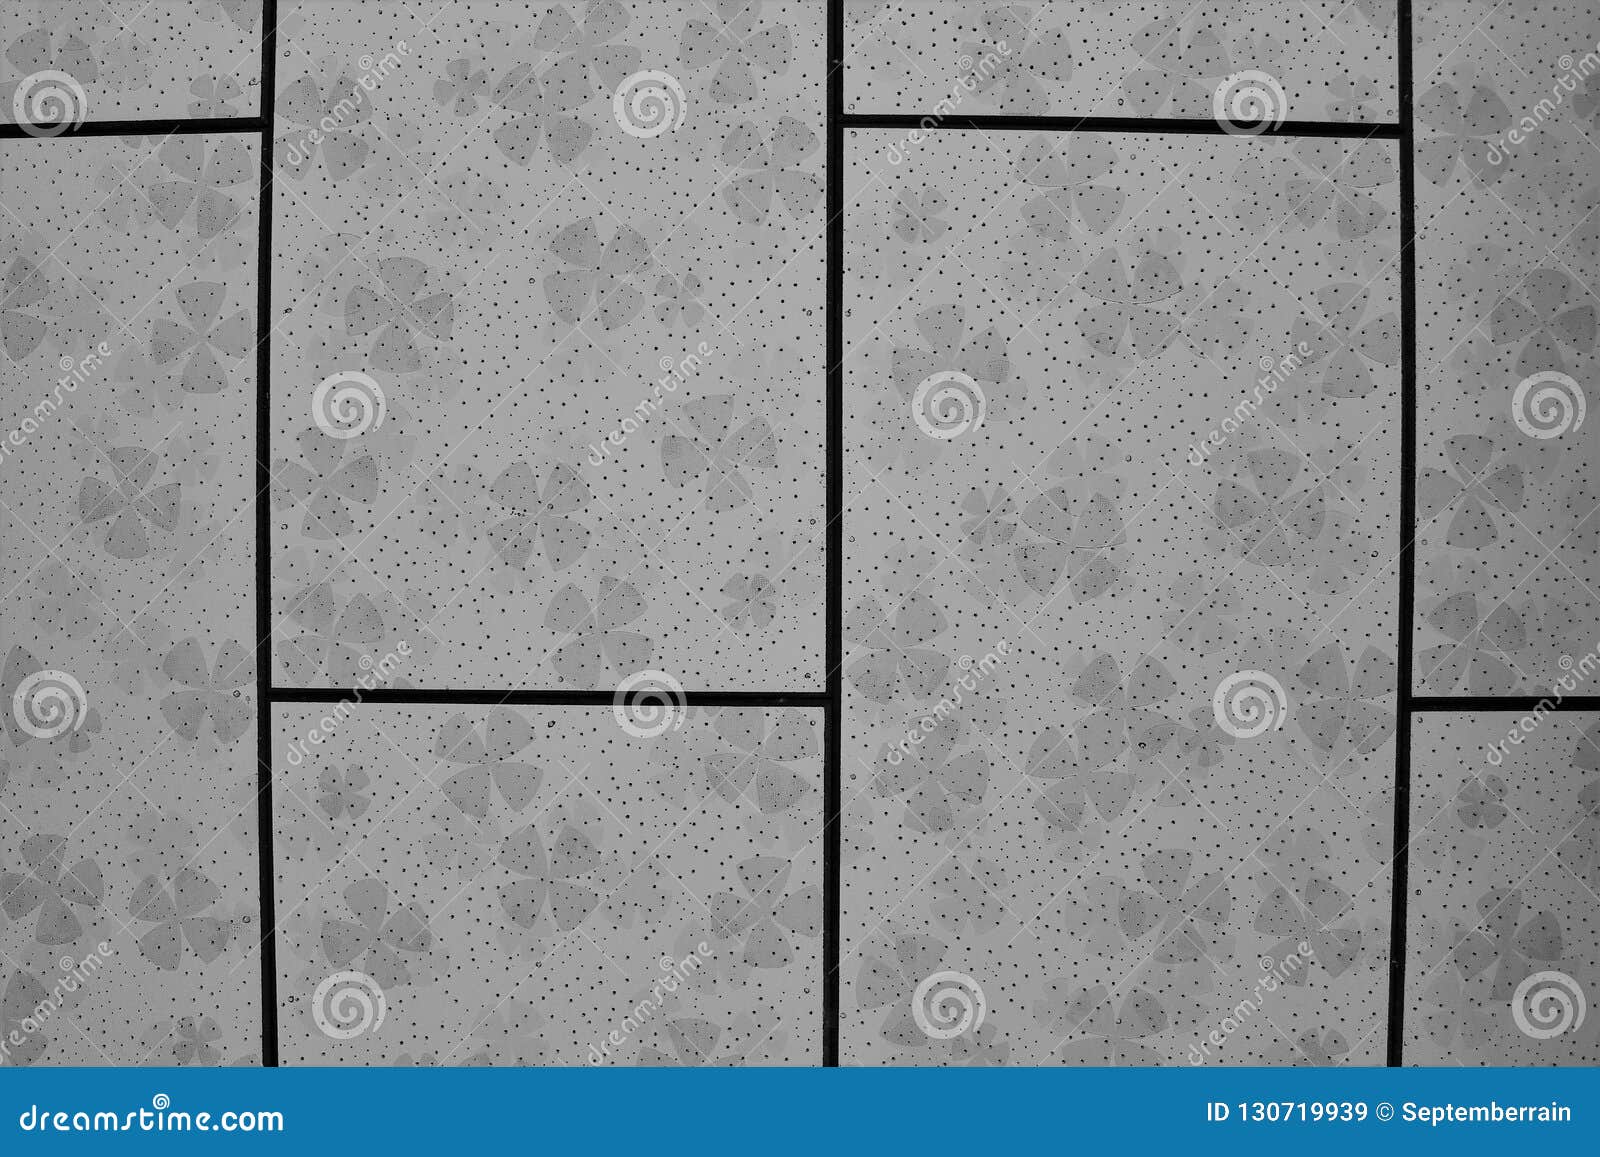 Ceiling Panels In An Office Stock Image Image Of Floral